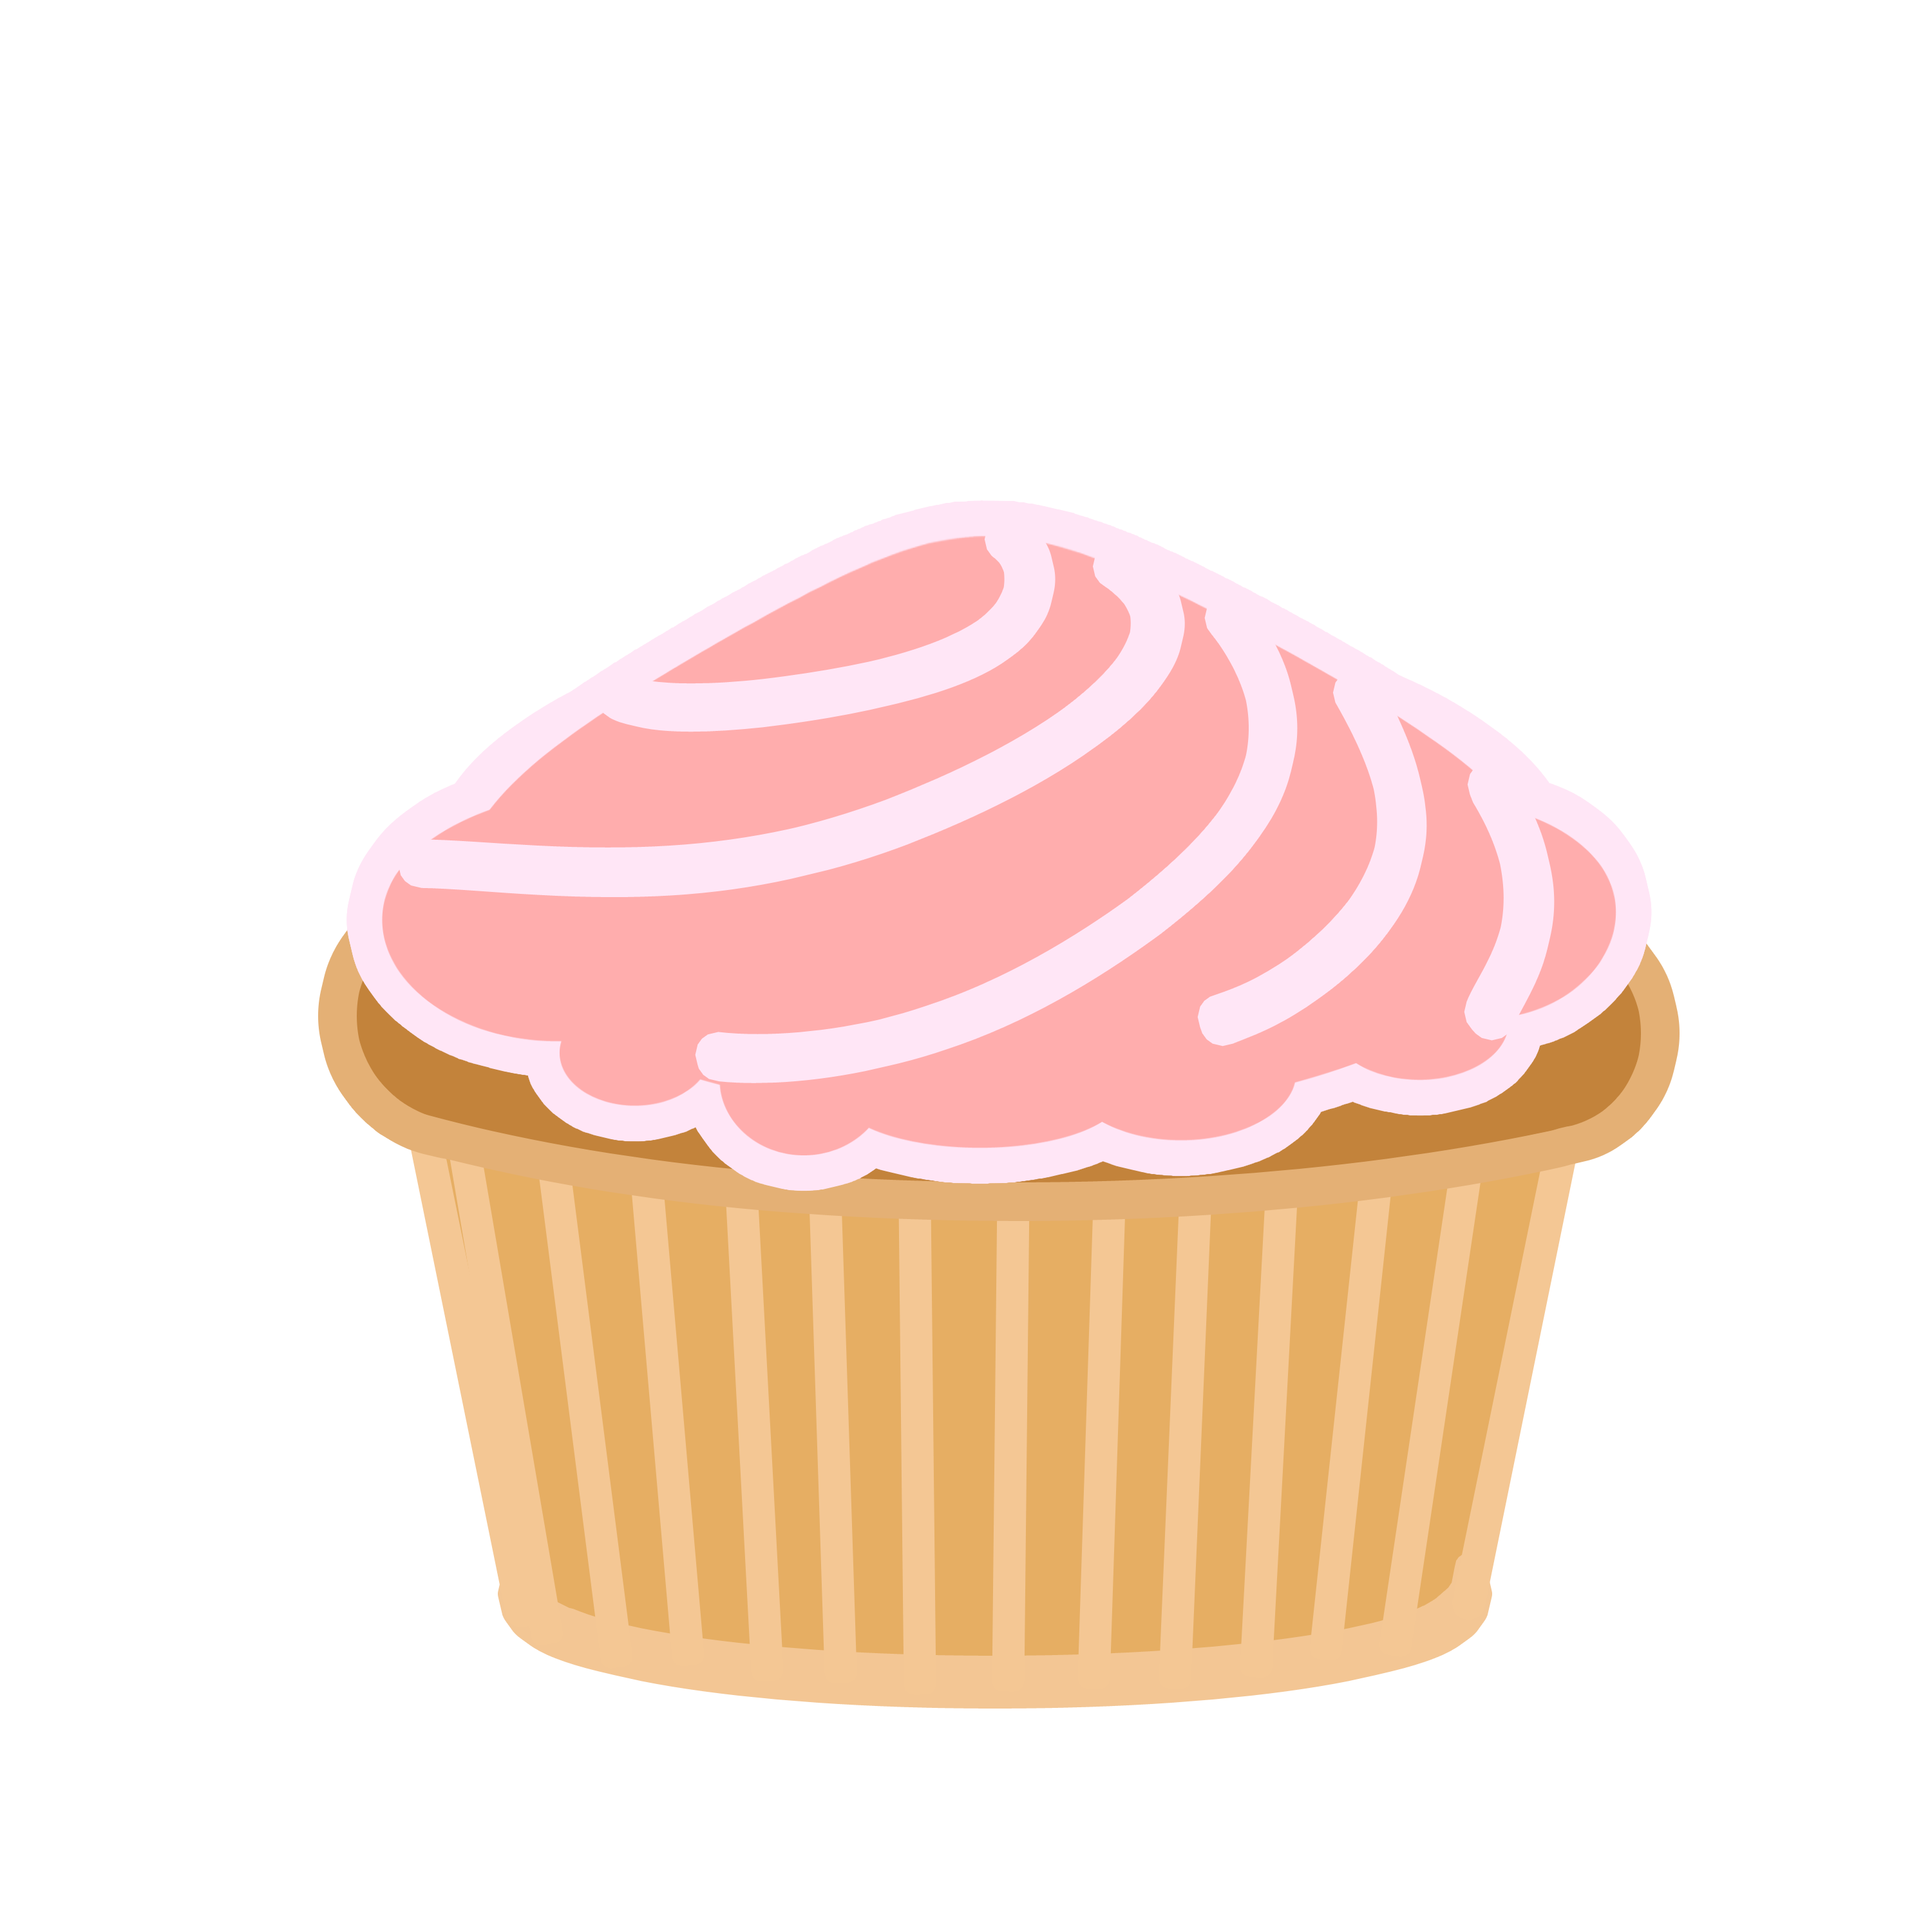 Pink Swirl Cupcake by Quick-Stop on DeviantArt